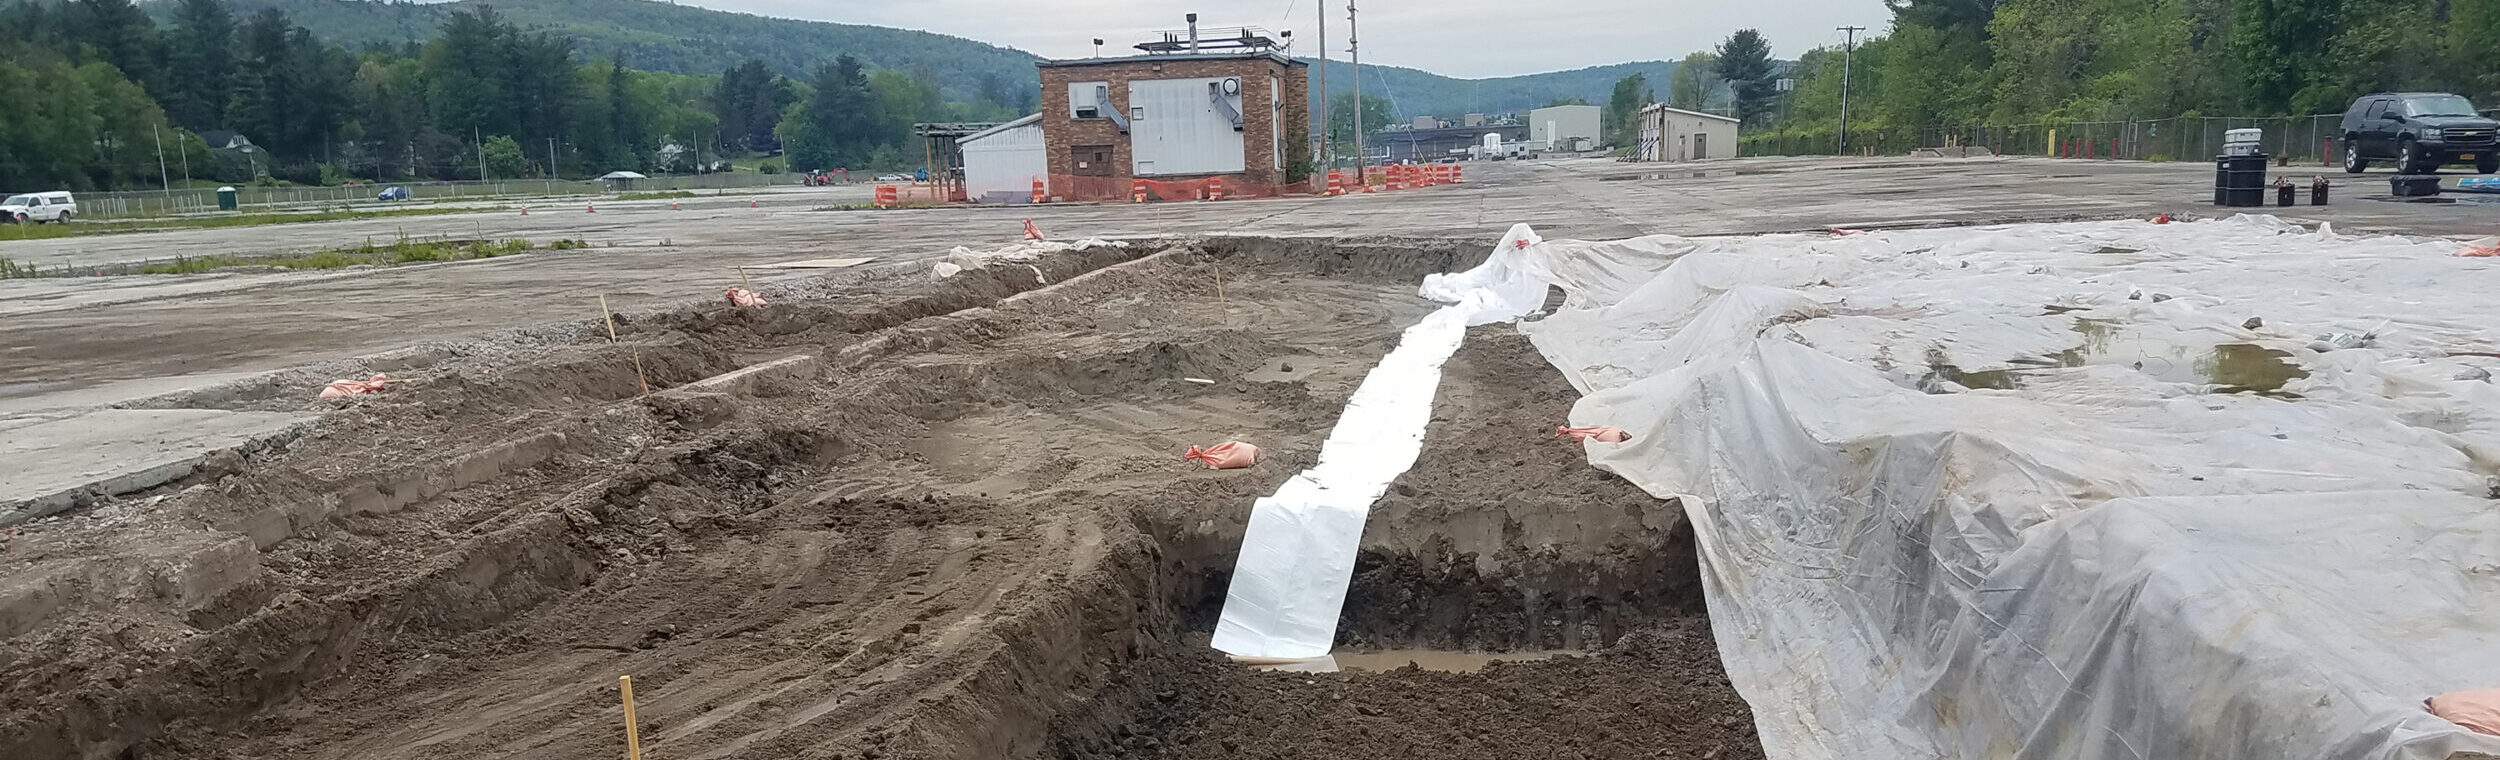 Remediation Of Pcb Impacted Soils Central New York 3